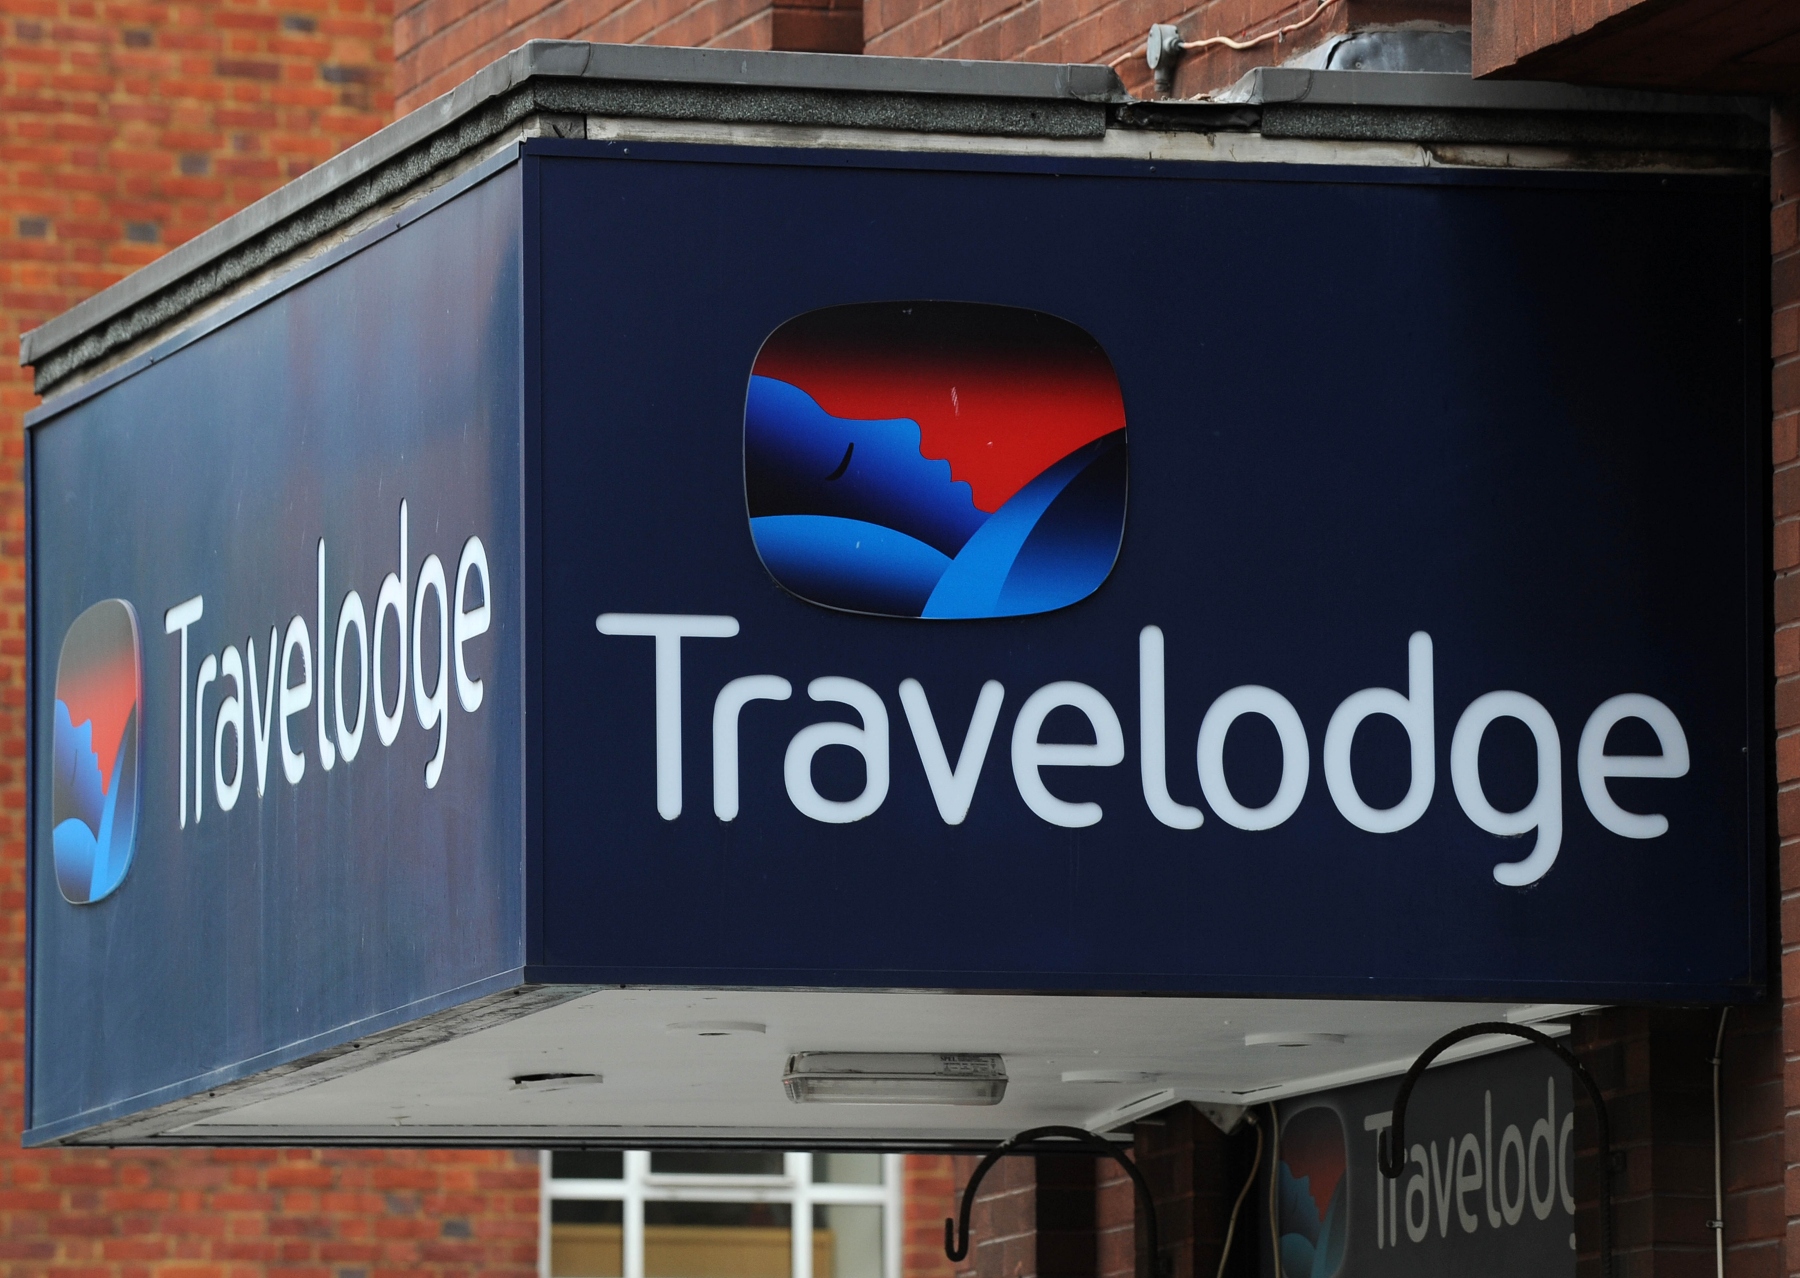 Travelodge has over 100 summer jobs available in London